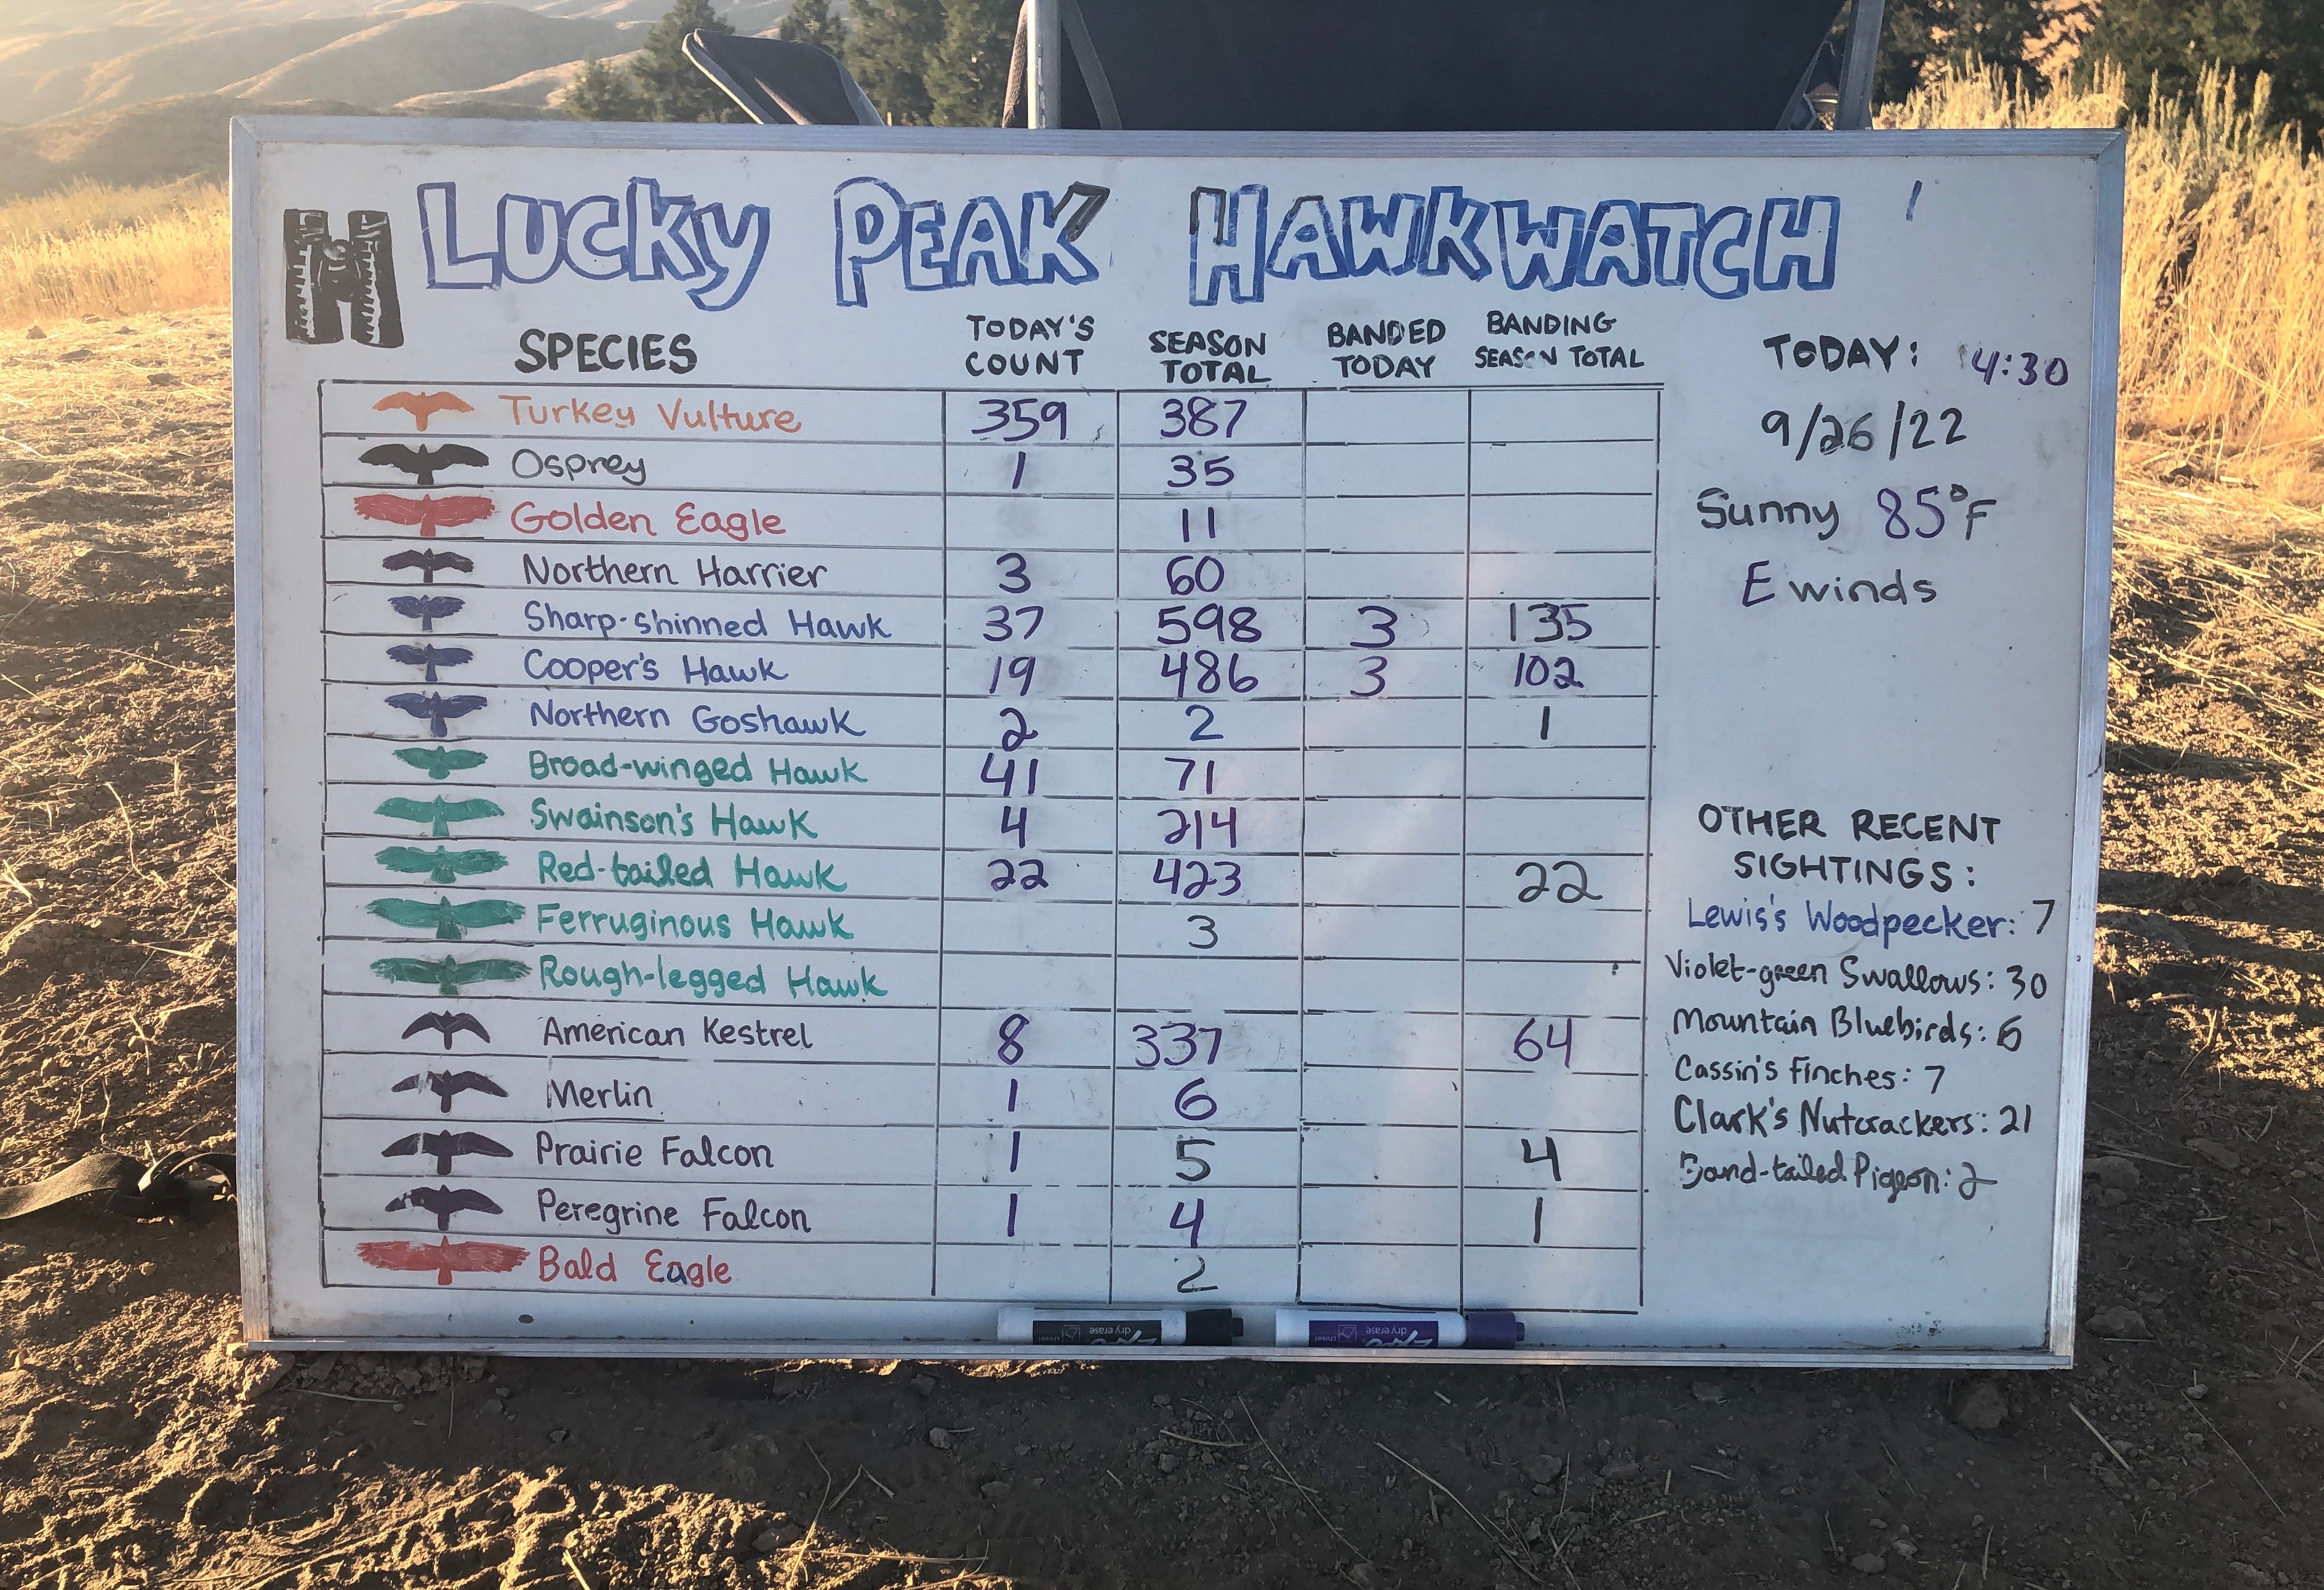 Photo of the Lucky Peak hawk watch whiteboard. It lists the daily and season totals for each species. On the side it lists "other recent sightings: Lewis's Woodpecker 7, Violet-green swallows 30, Mountain Bluebirds 6, Cassin's Finches 7, Clark's Nutcrackers 21, Band-tailed Pigeon 2